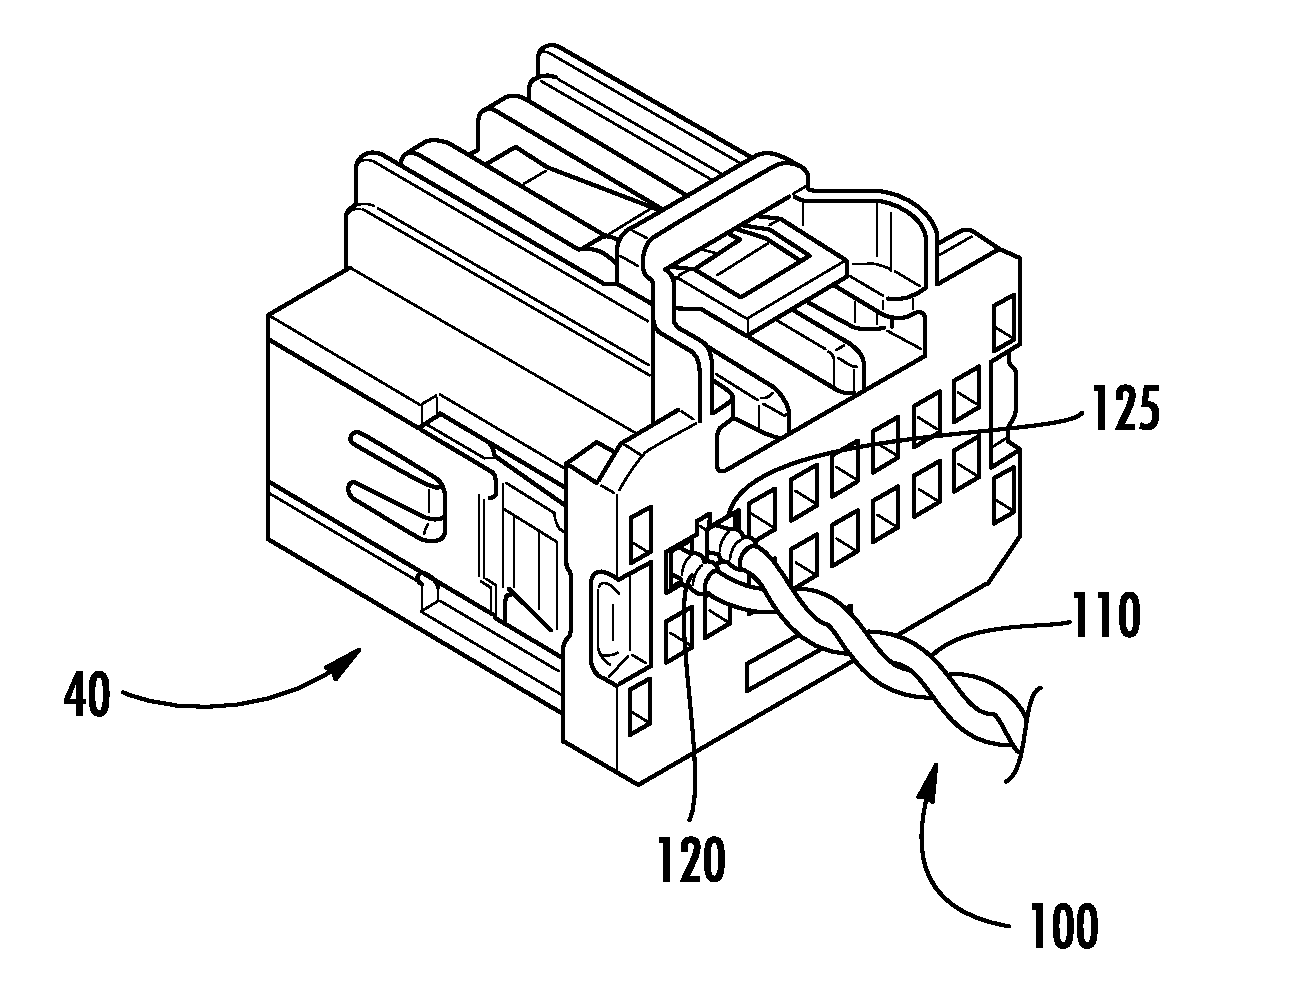 Electrical harness connector system with differential pair connection link